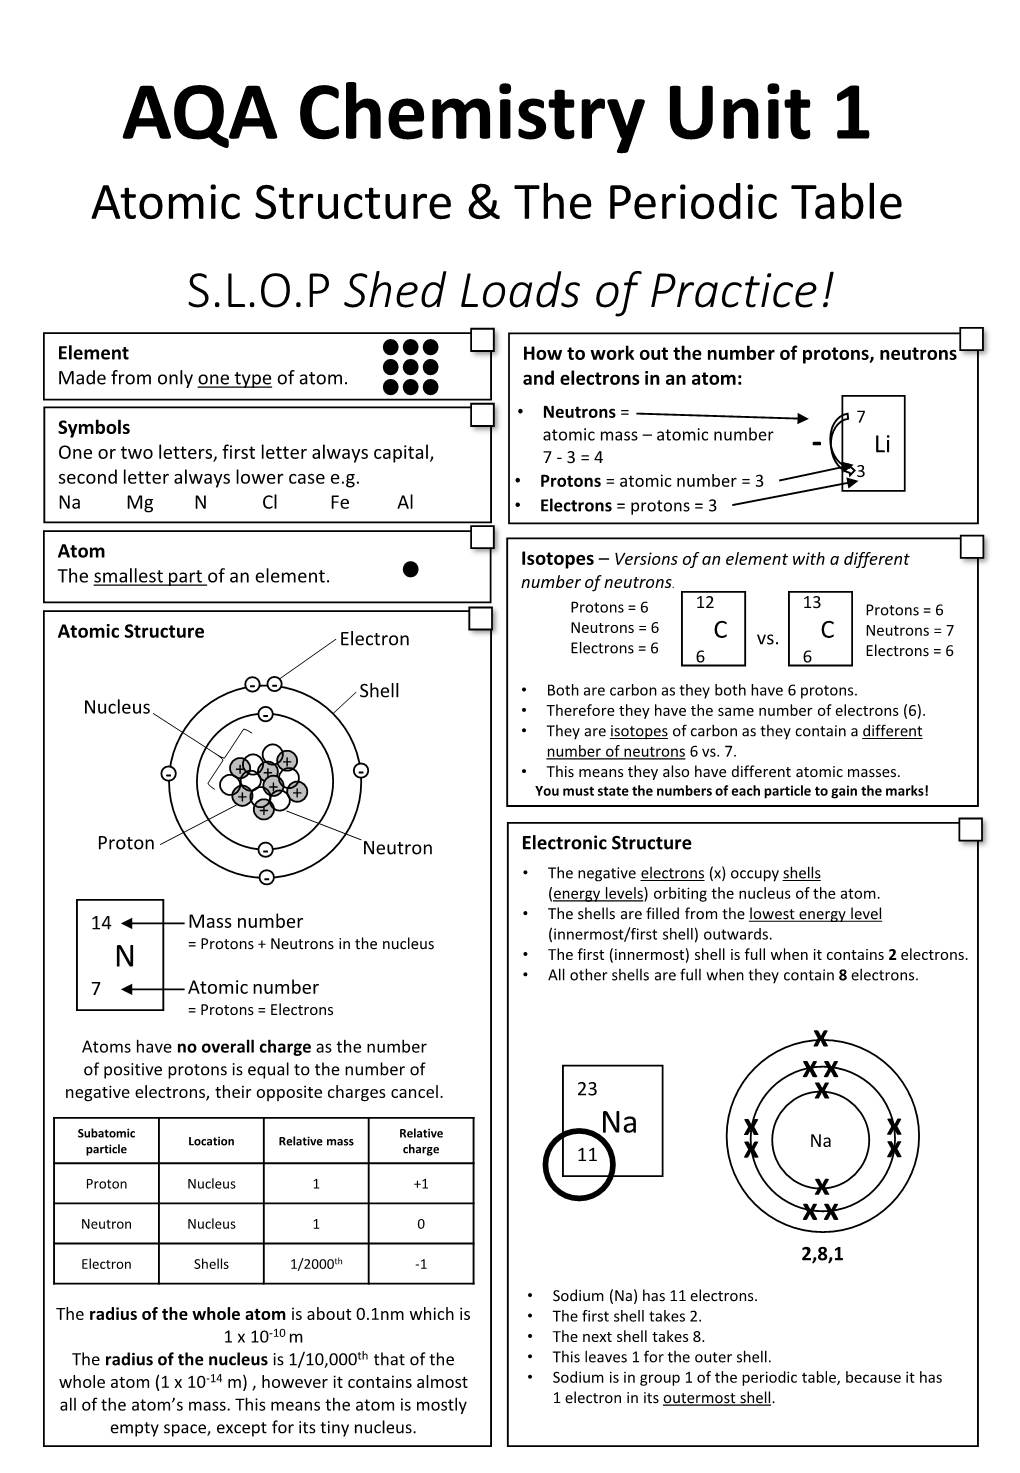 AQA Chemistry Unit 1 Atomic Structure & the Periodic Table S.L.O.P Shed Loads of Practice!